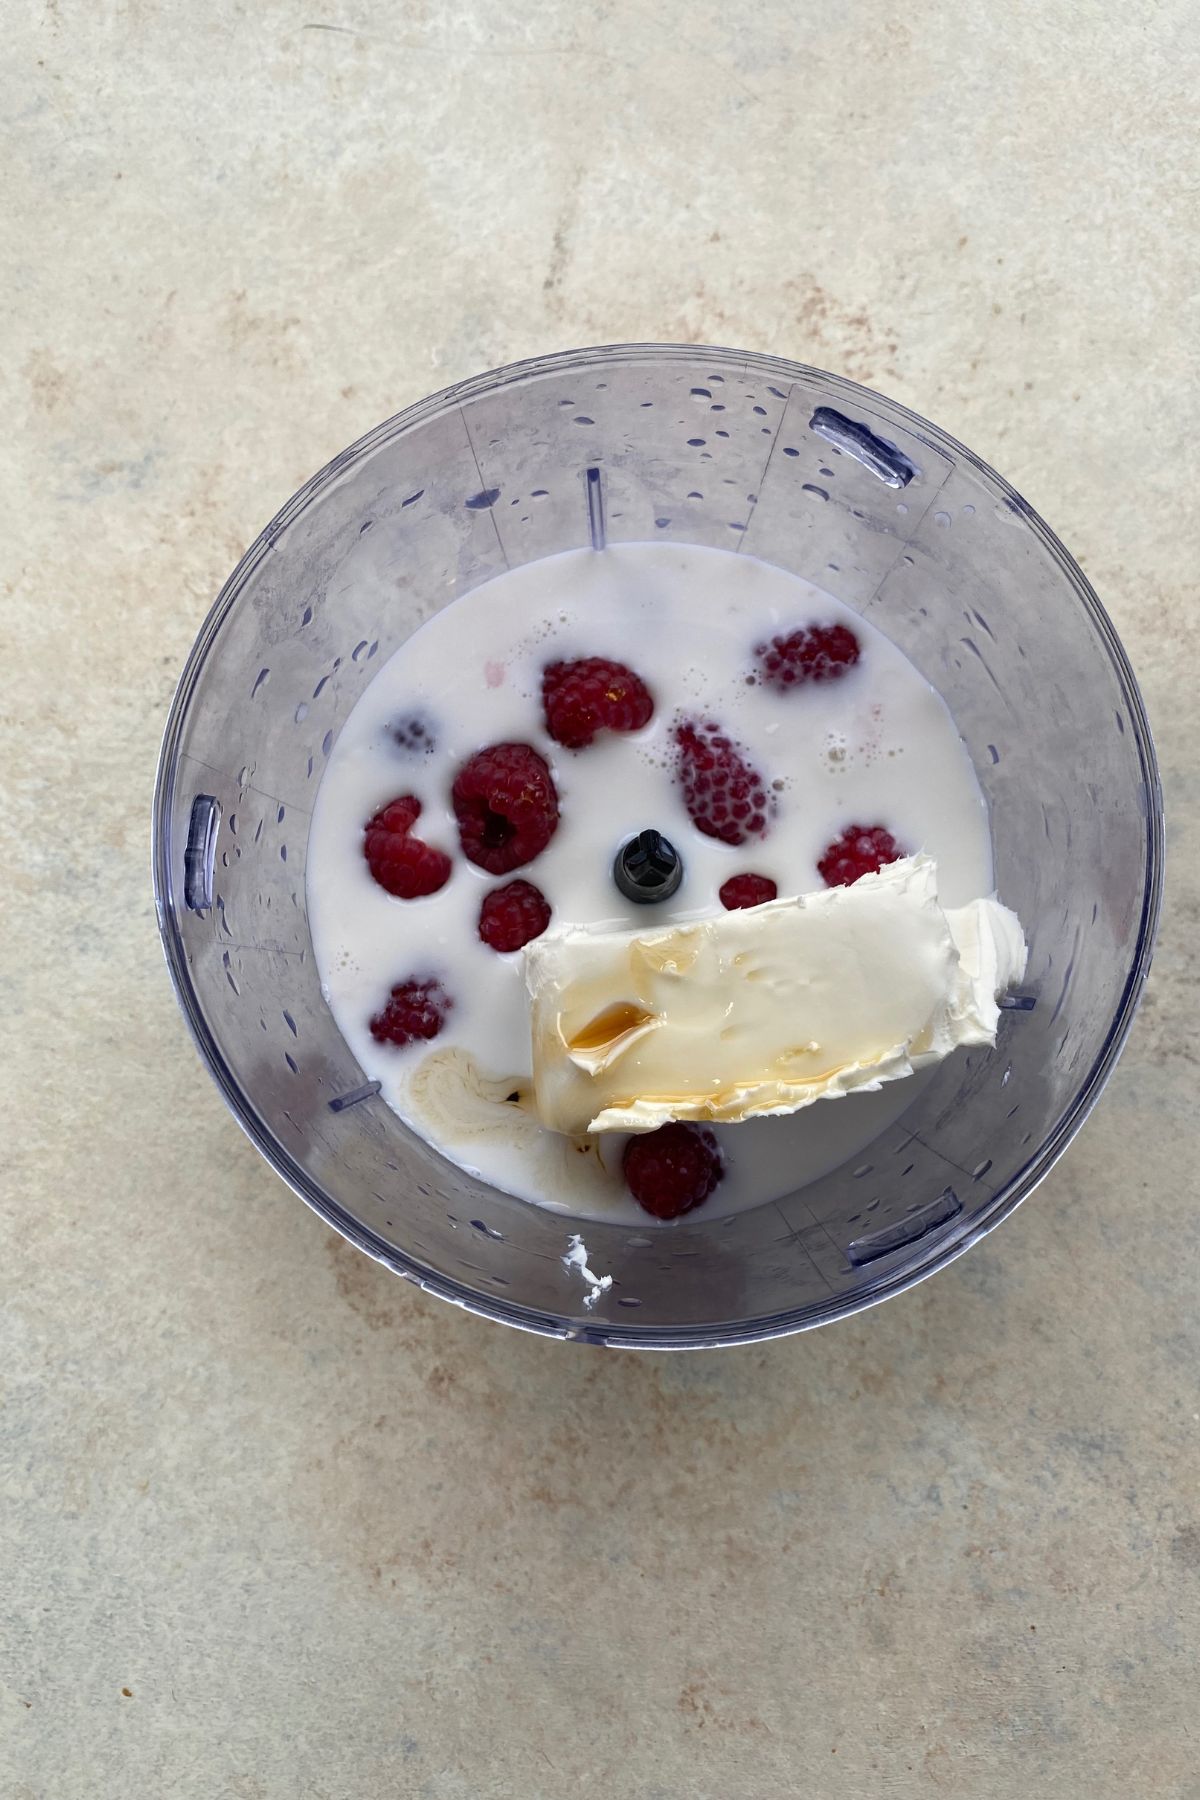 A bowl of yogurt with berries in it.